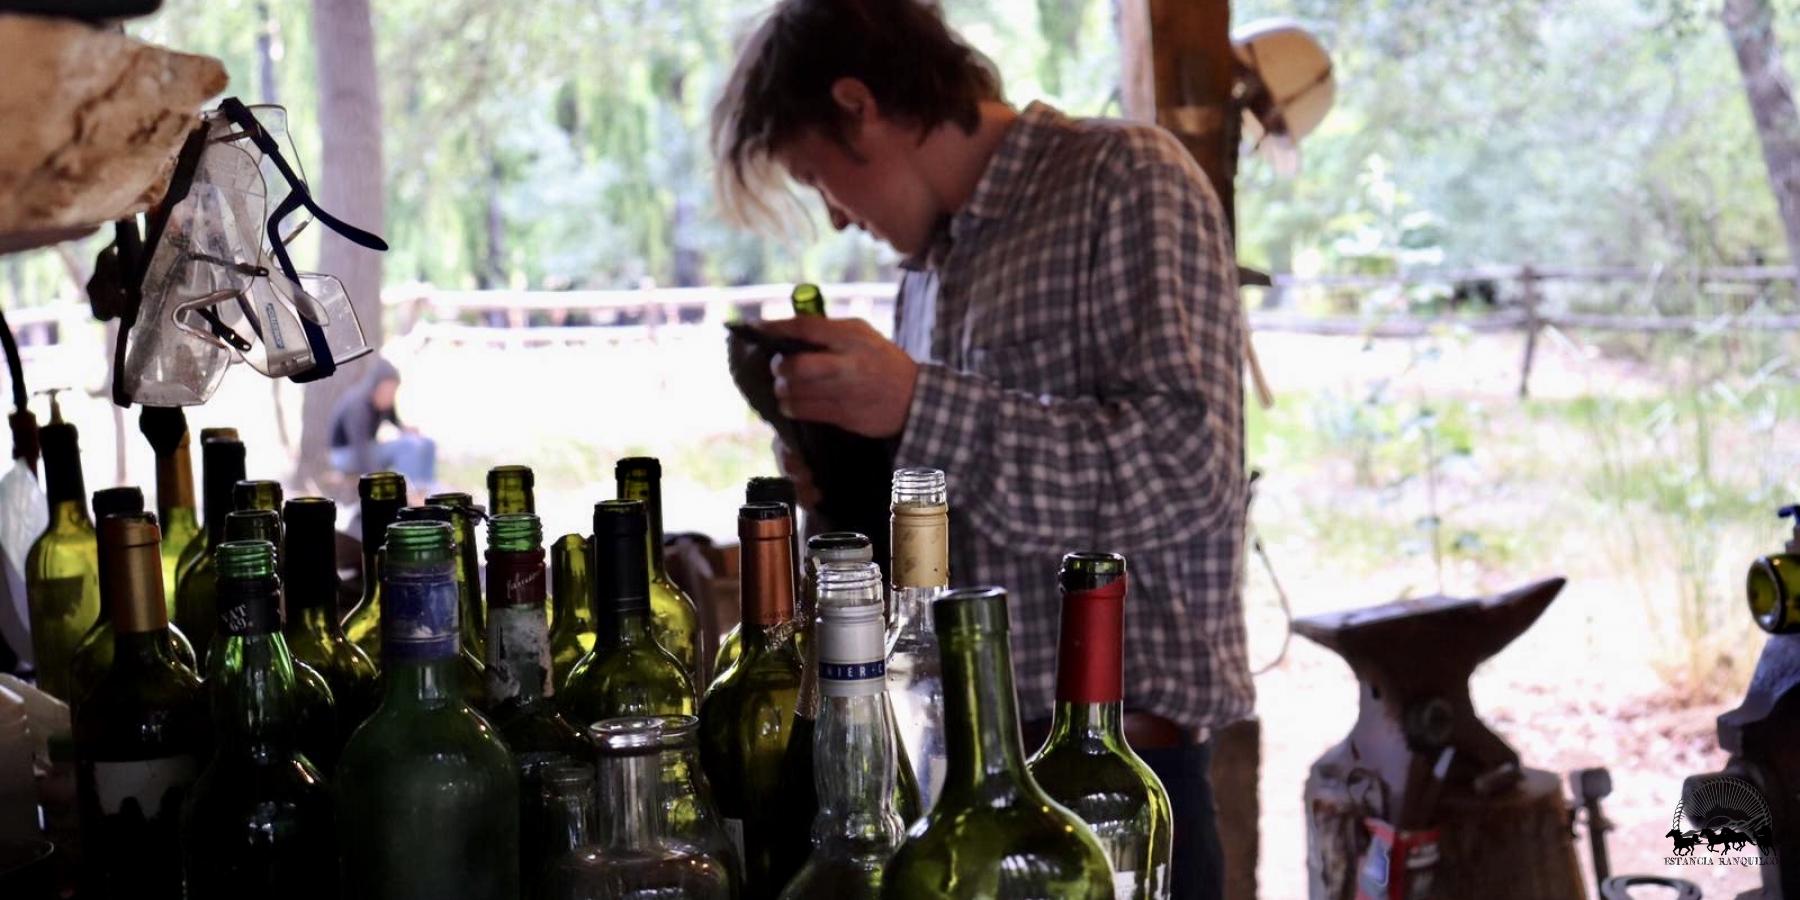 Man cleaning empty Argentine Malbec bottles to reuse and make into glasses